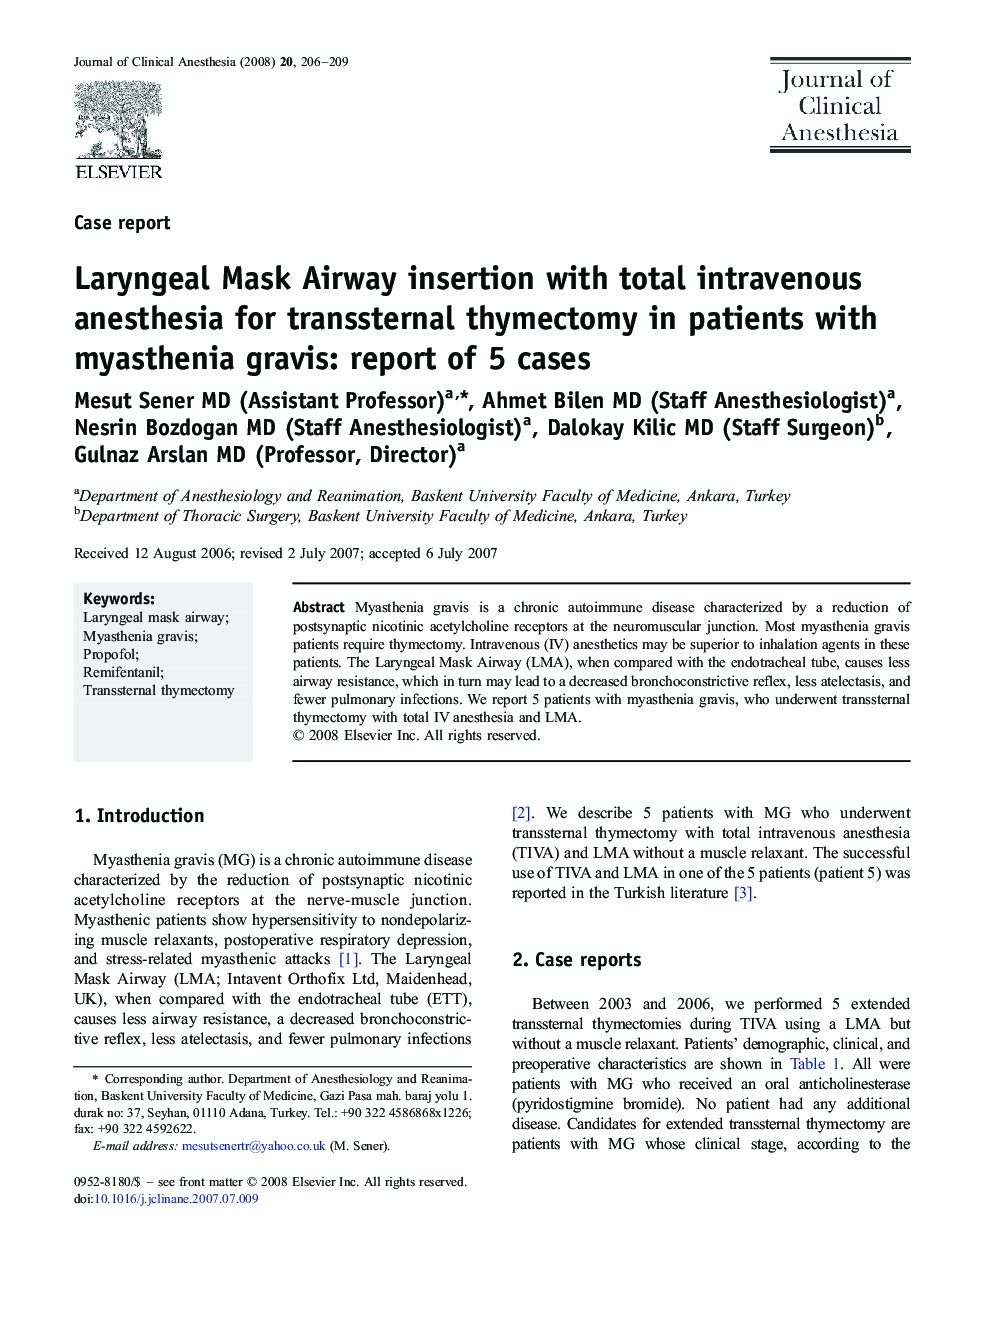 Laryngeal Mask Airway insertion with total intravenous anesthesia for transsternal thymectomy in patients with myasthenia gravis: report of 5 cases